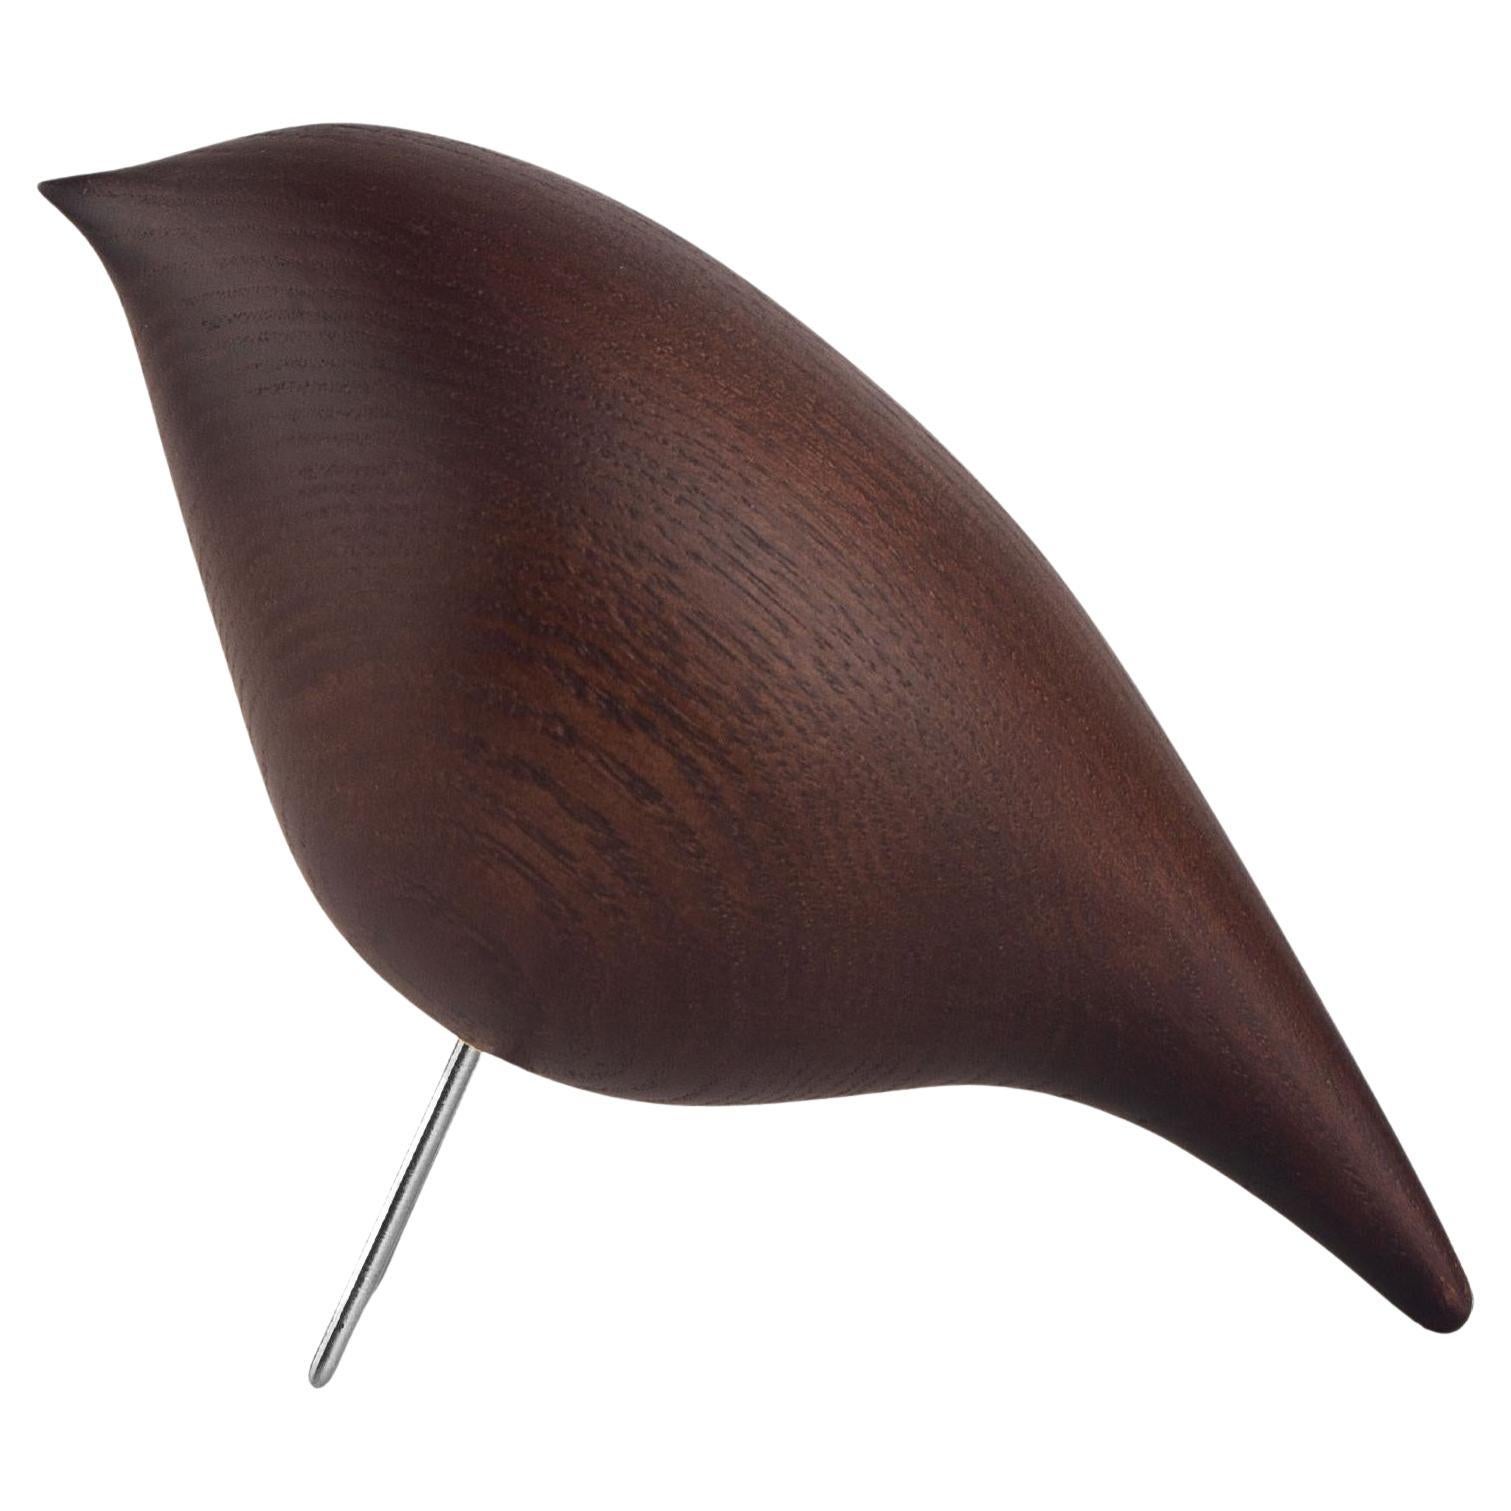 Contemporay Tweety Decorative Bird CS2 by Noom, Brown Ashwood, In stock For Sale